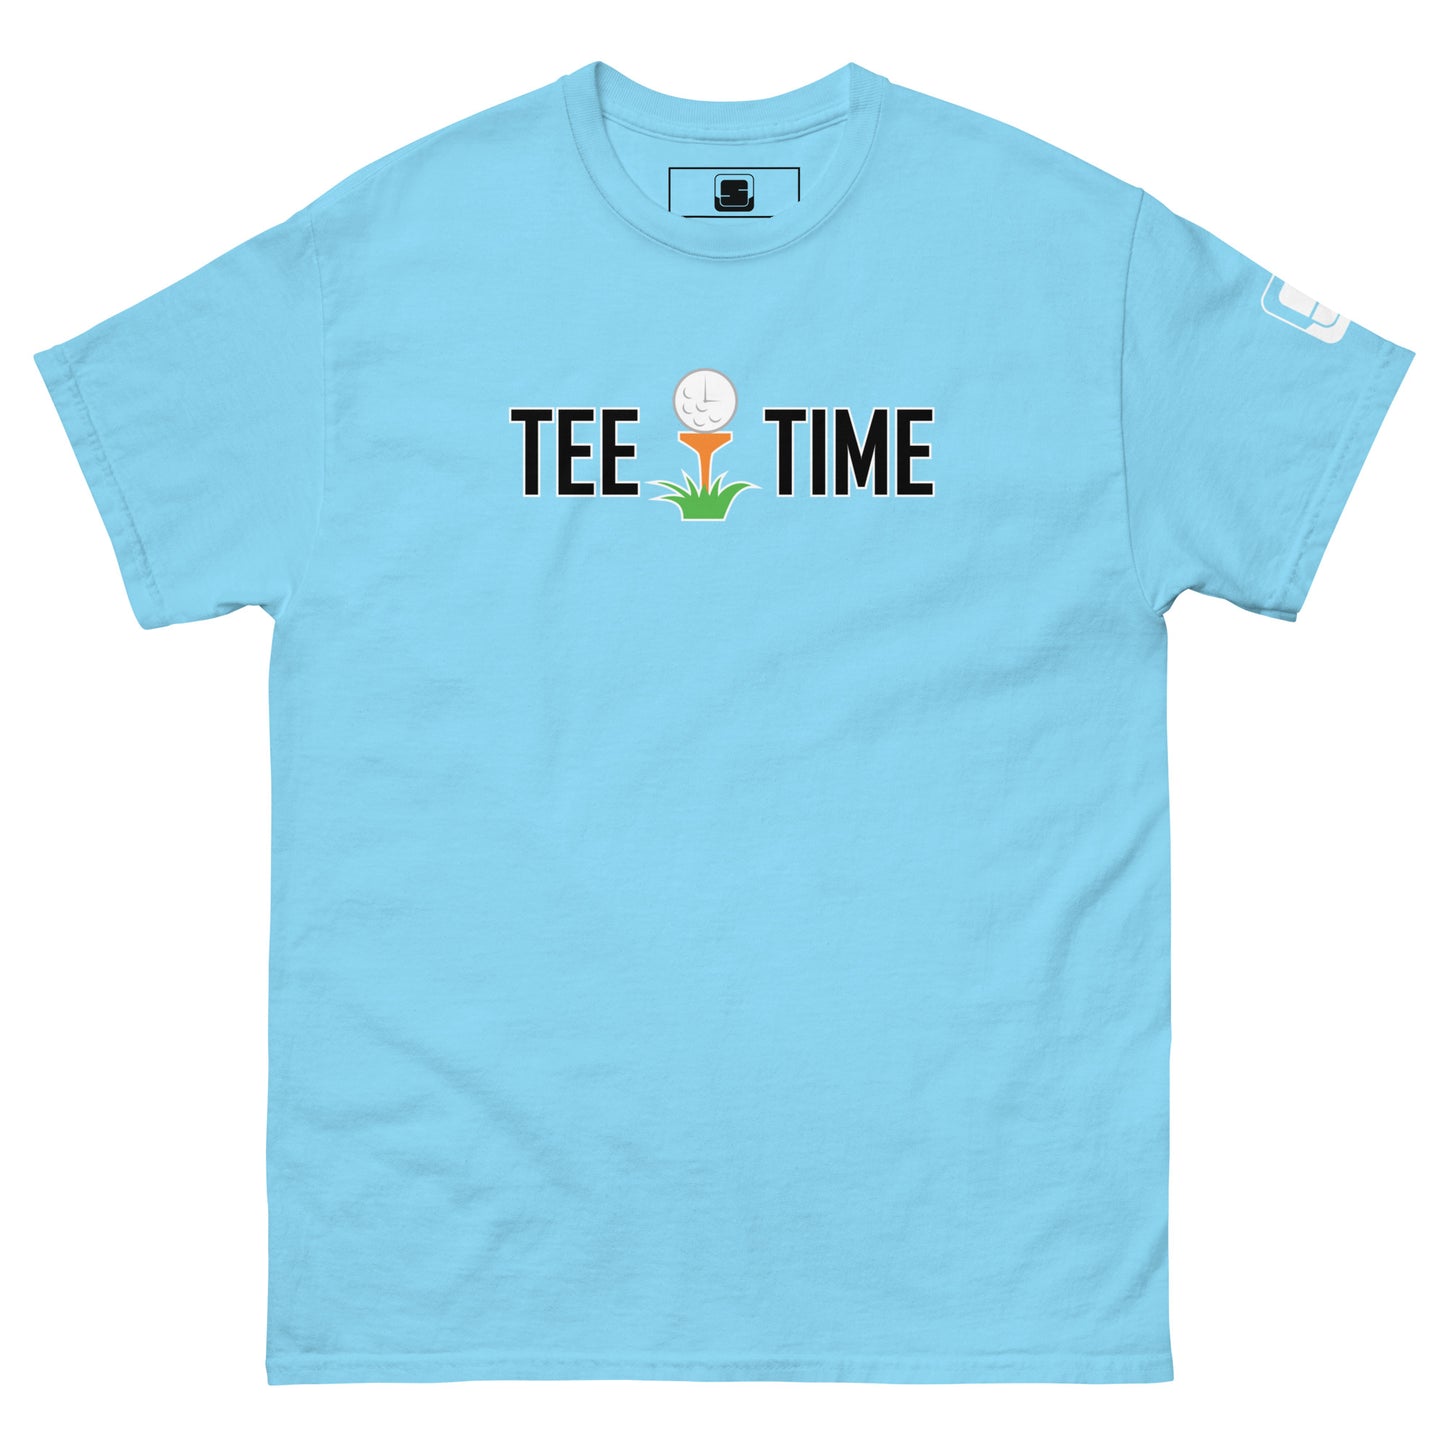 The image presents a sky blue t-shirt with the text "TEE TIME" and an image of a golf ball on a tee with a small green sprout at the base. The graphic is centered on the chest area. A small white logo appears on the right sleeve. The t-shirt is spread out flat to display its design clearly against a plain background, highlighting the vibrant color and the playful, golf-inspired motif